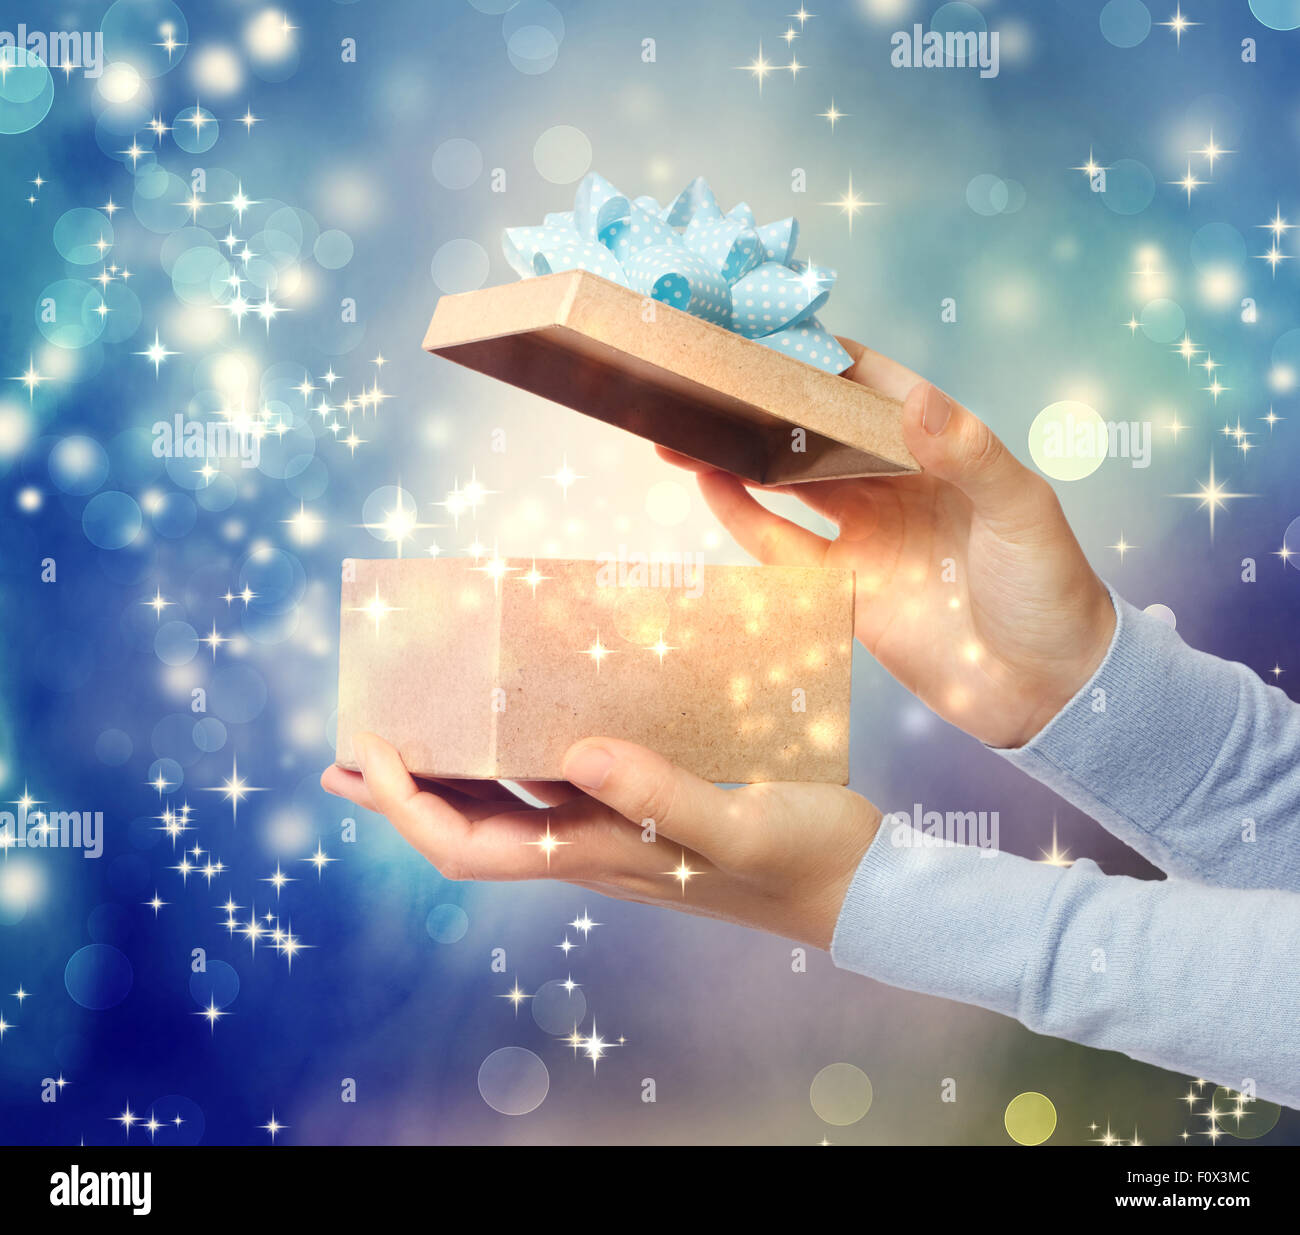 A magical glowing present box being opened Stock Photo